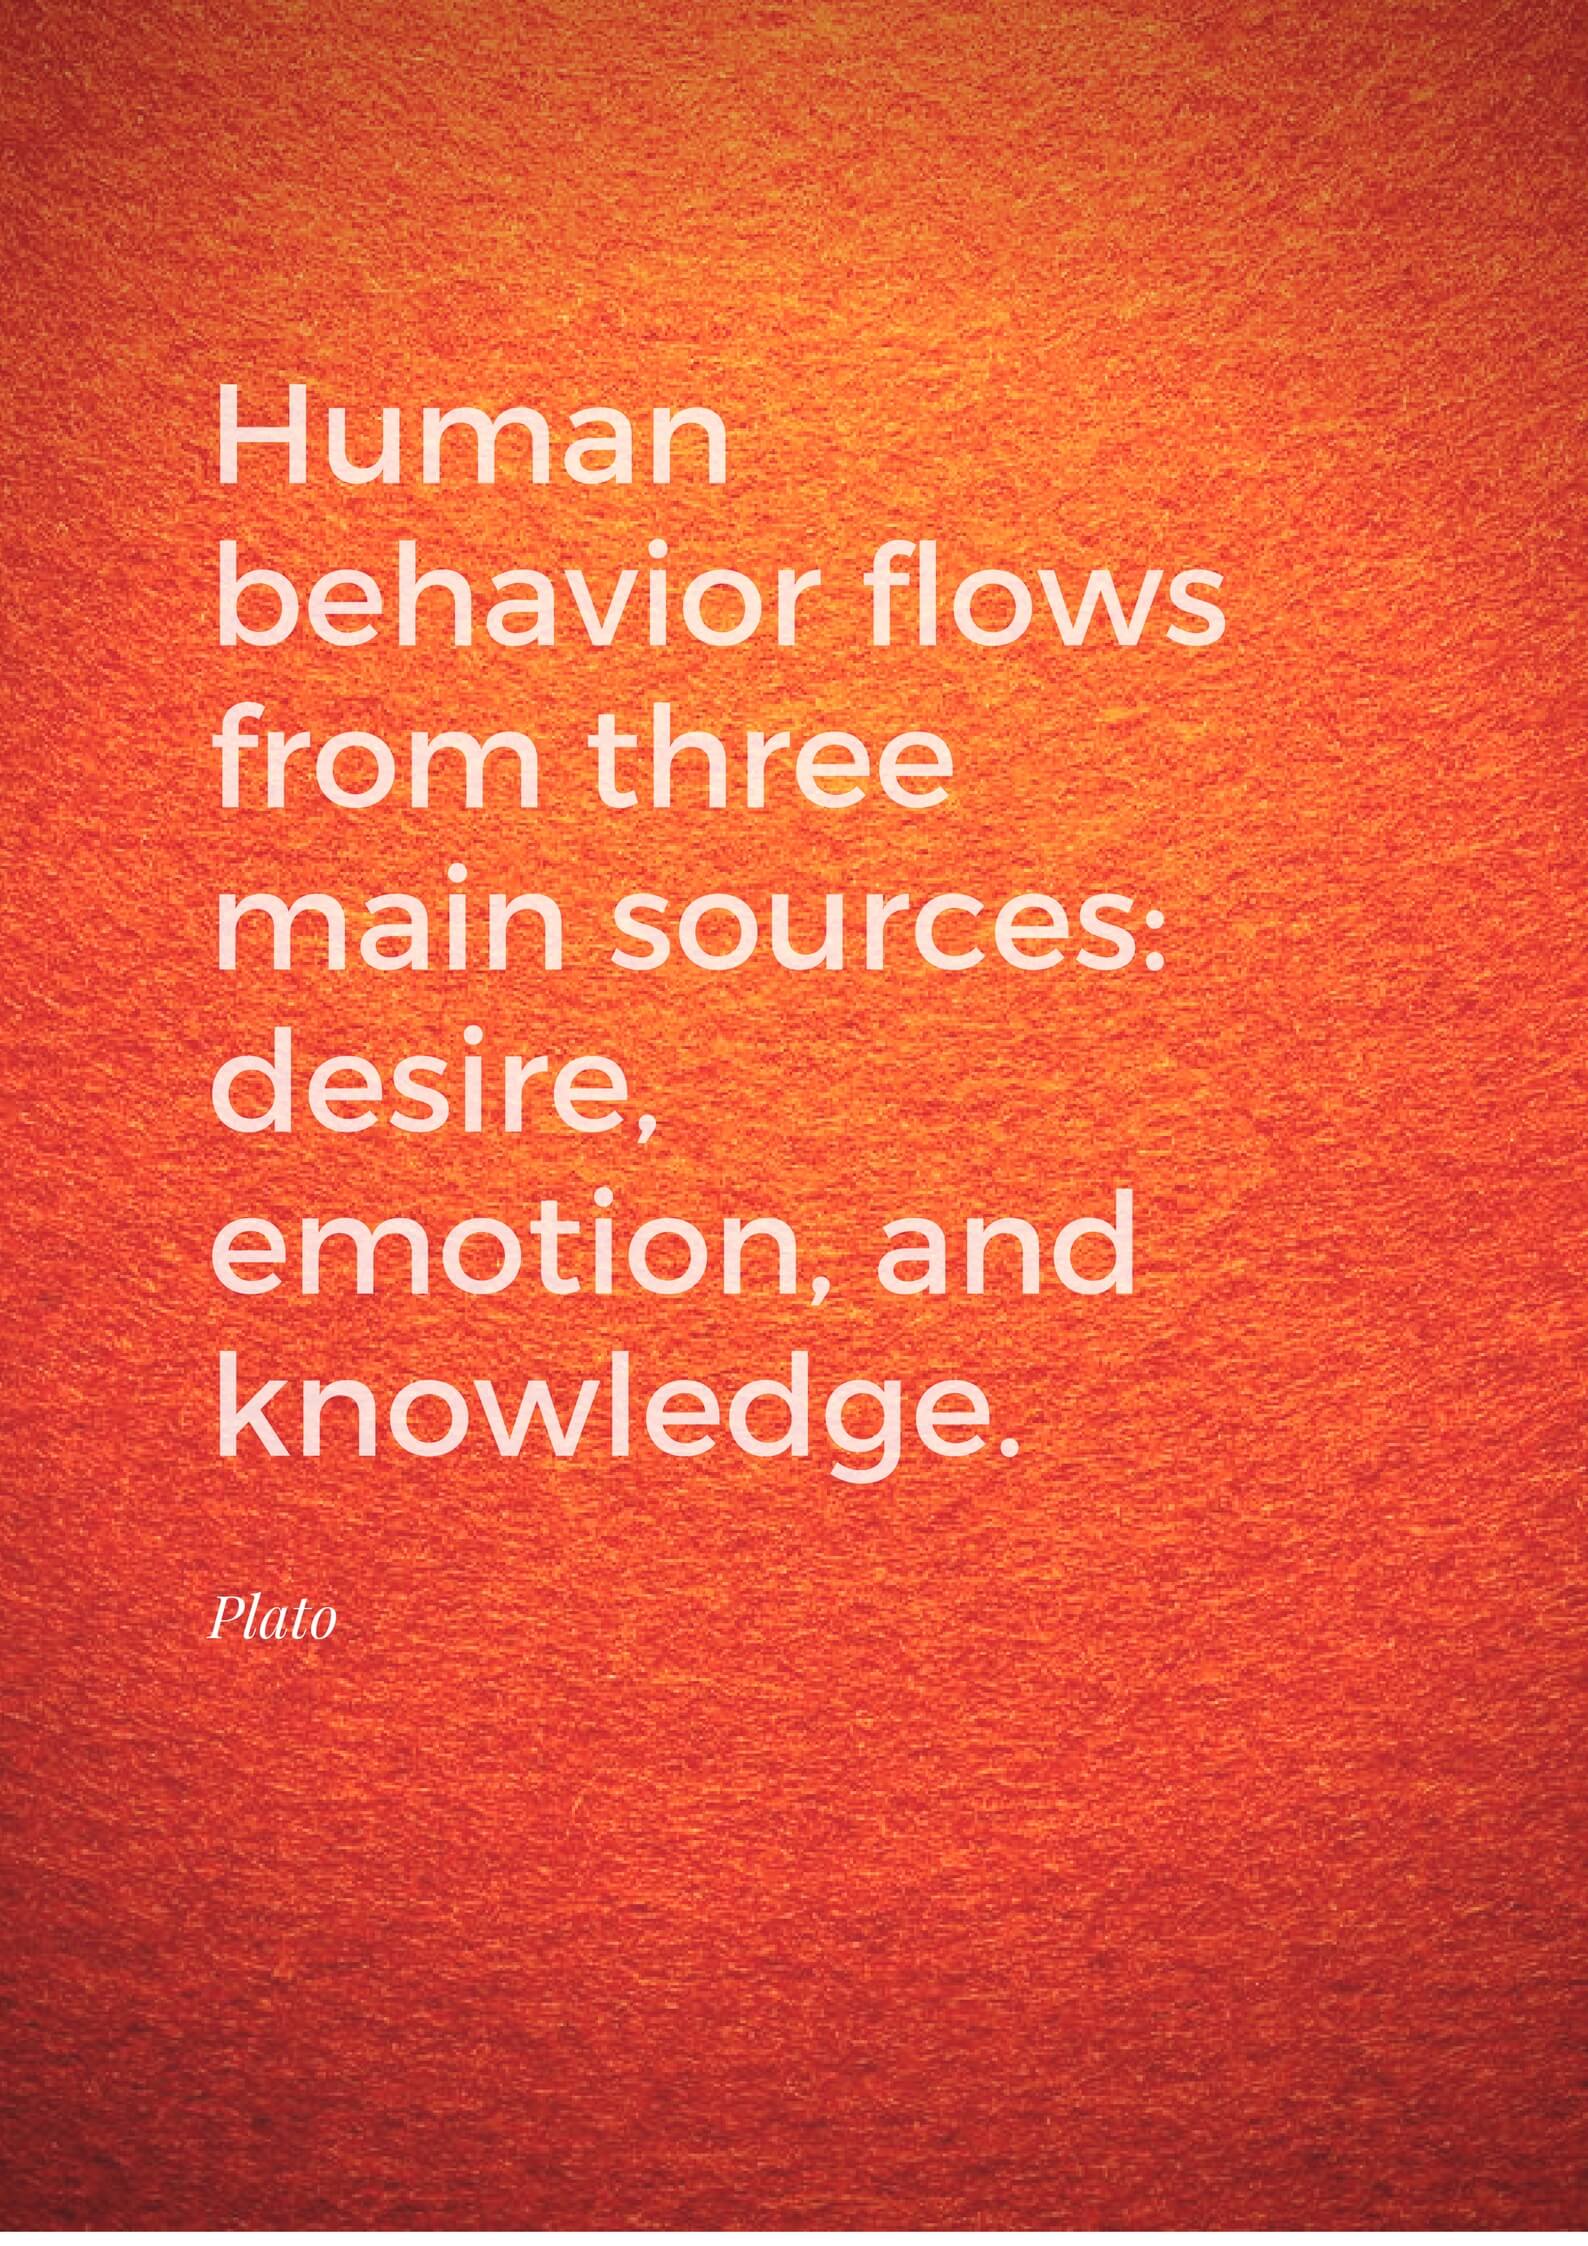 Human behavior flows from three main sources desire, emotion, and knowledge. Plato